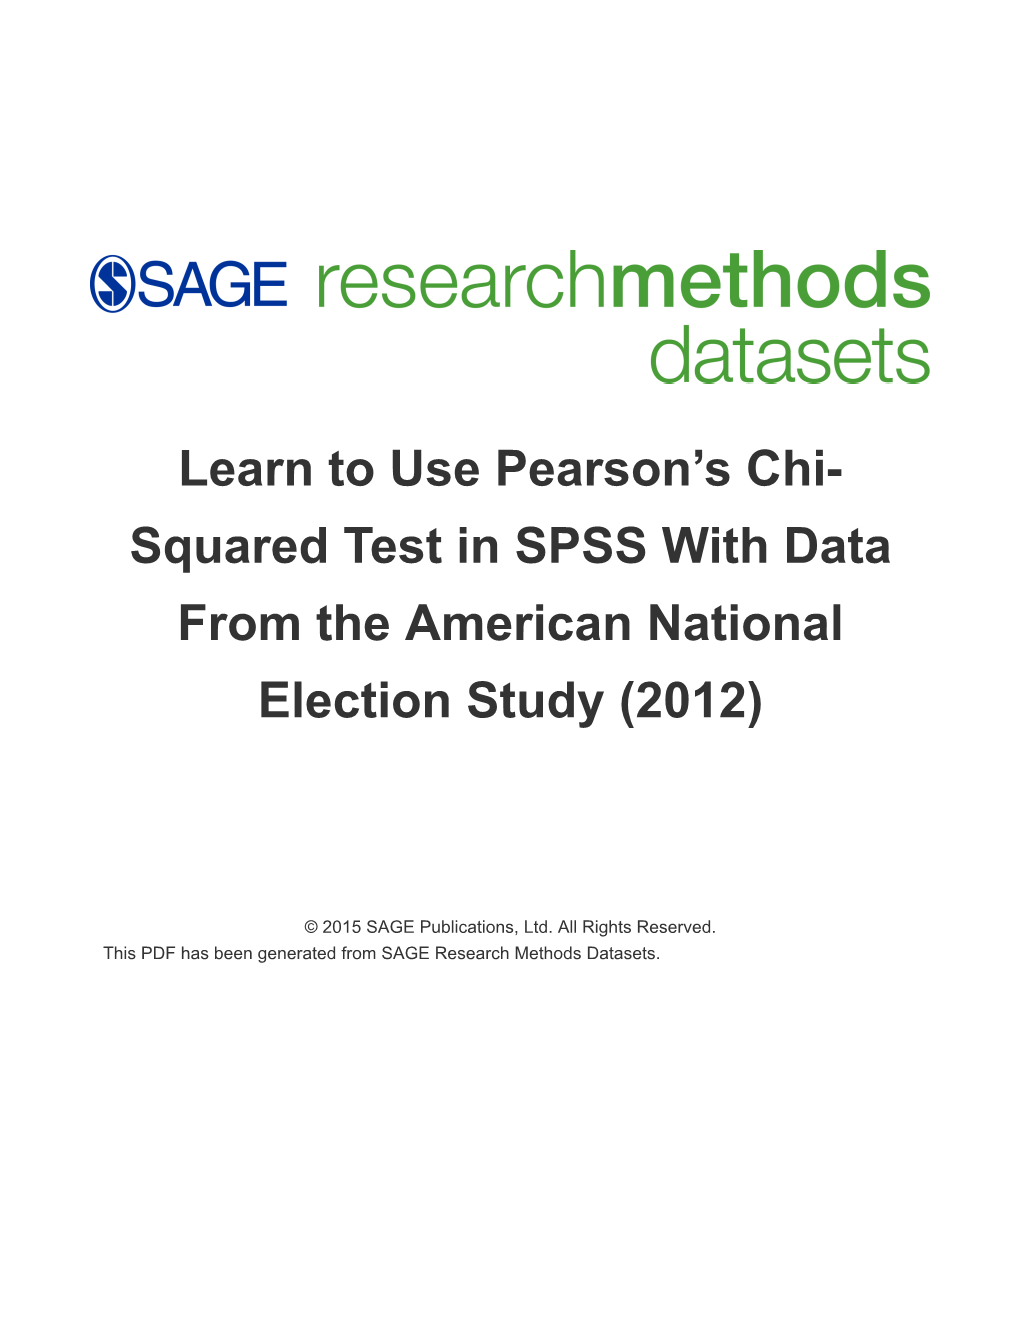 Learn to Use Pearson's Chi- Squared Test in SPSS with Data from The